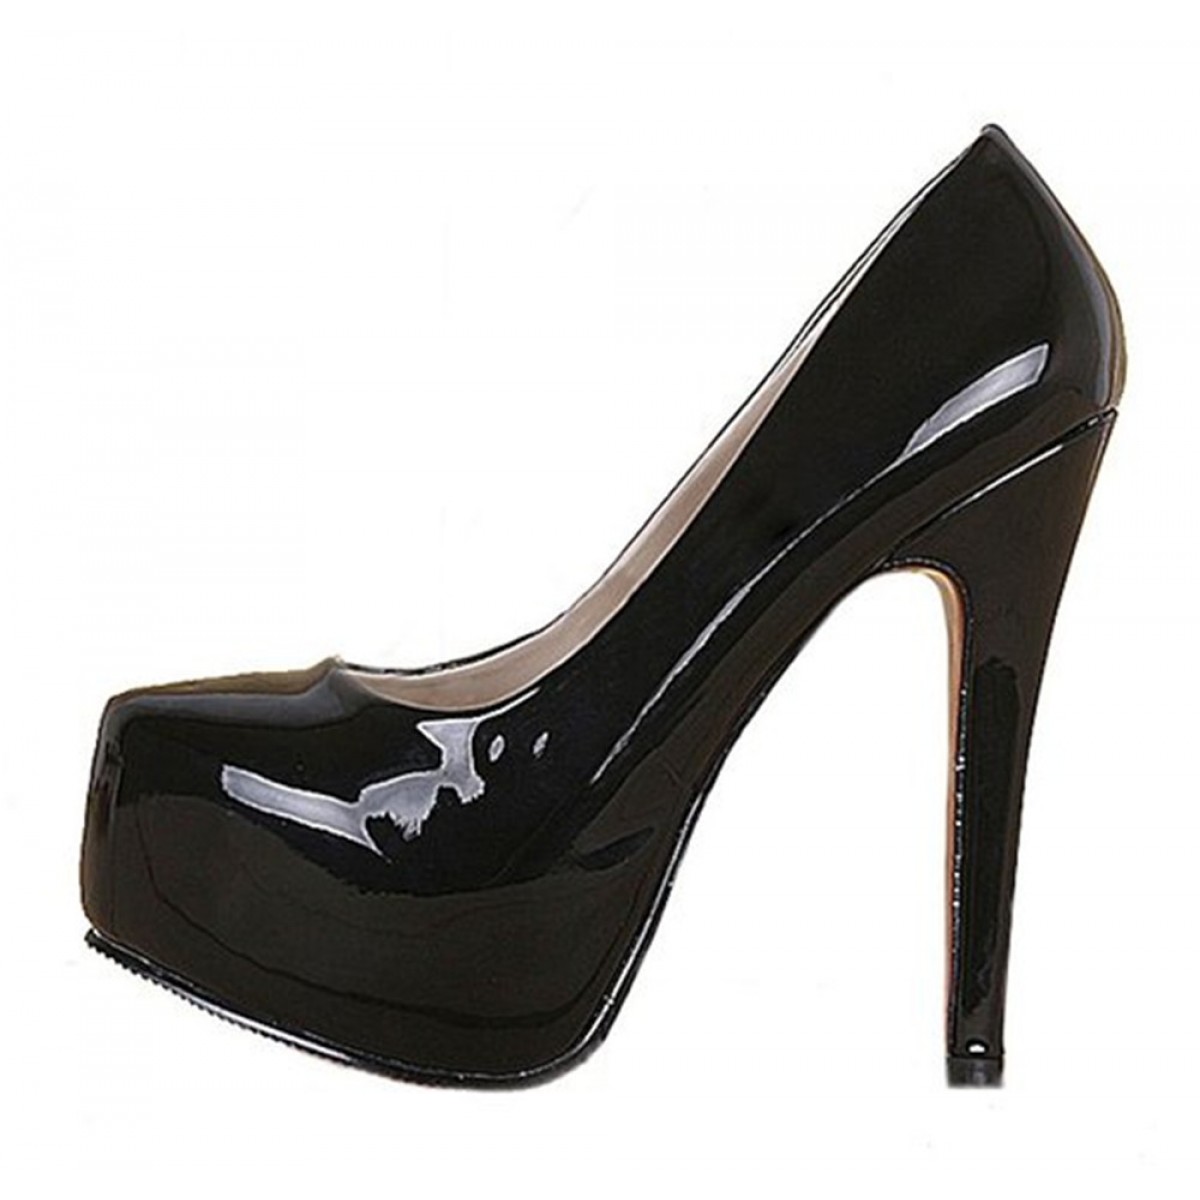 Sophisticated 4.5 Inches High Heel Shiny Platform Celebrity Shoes